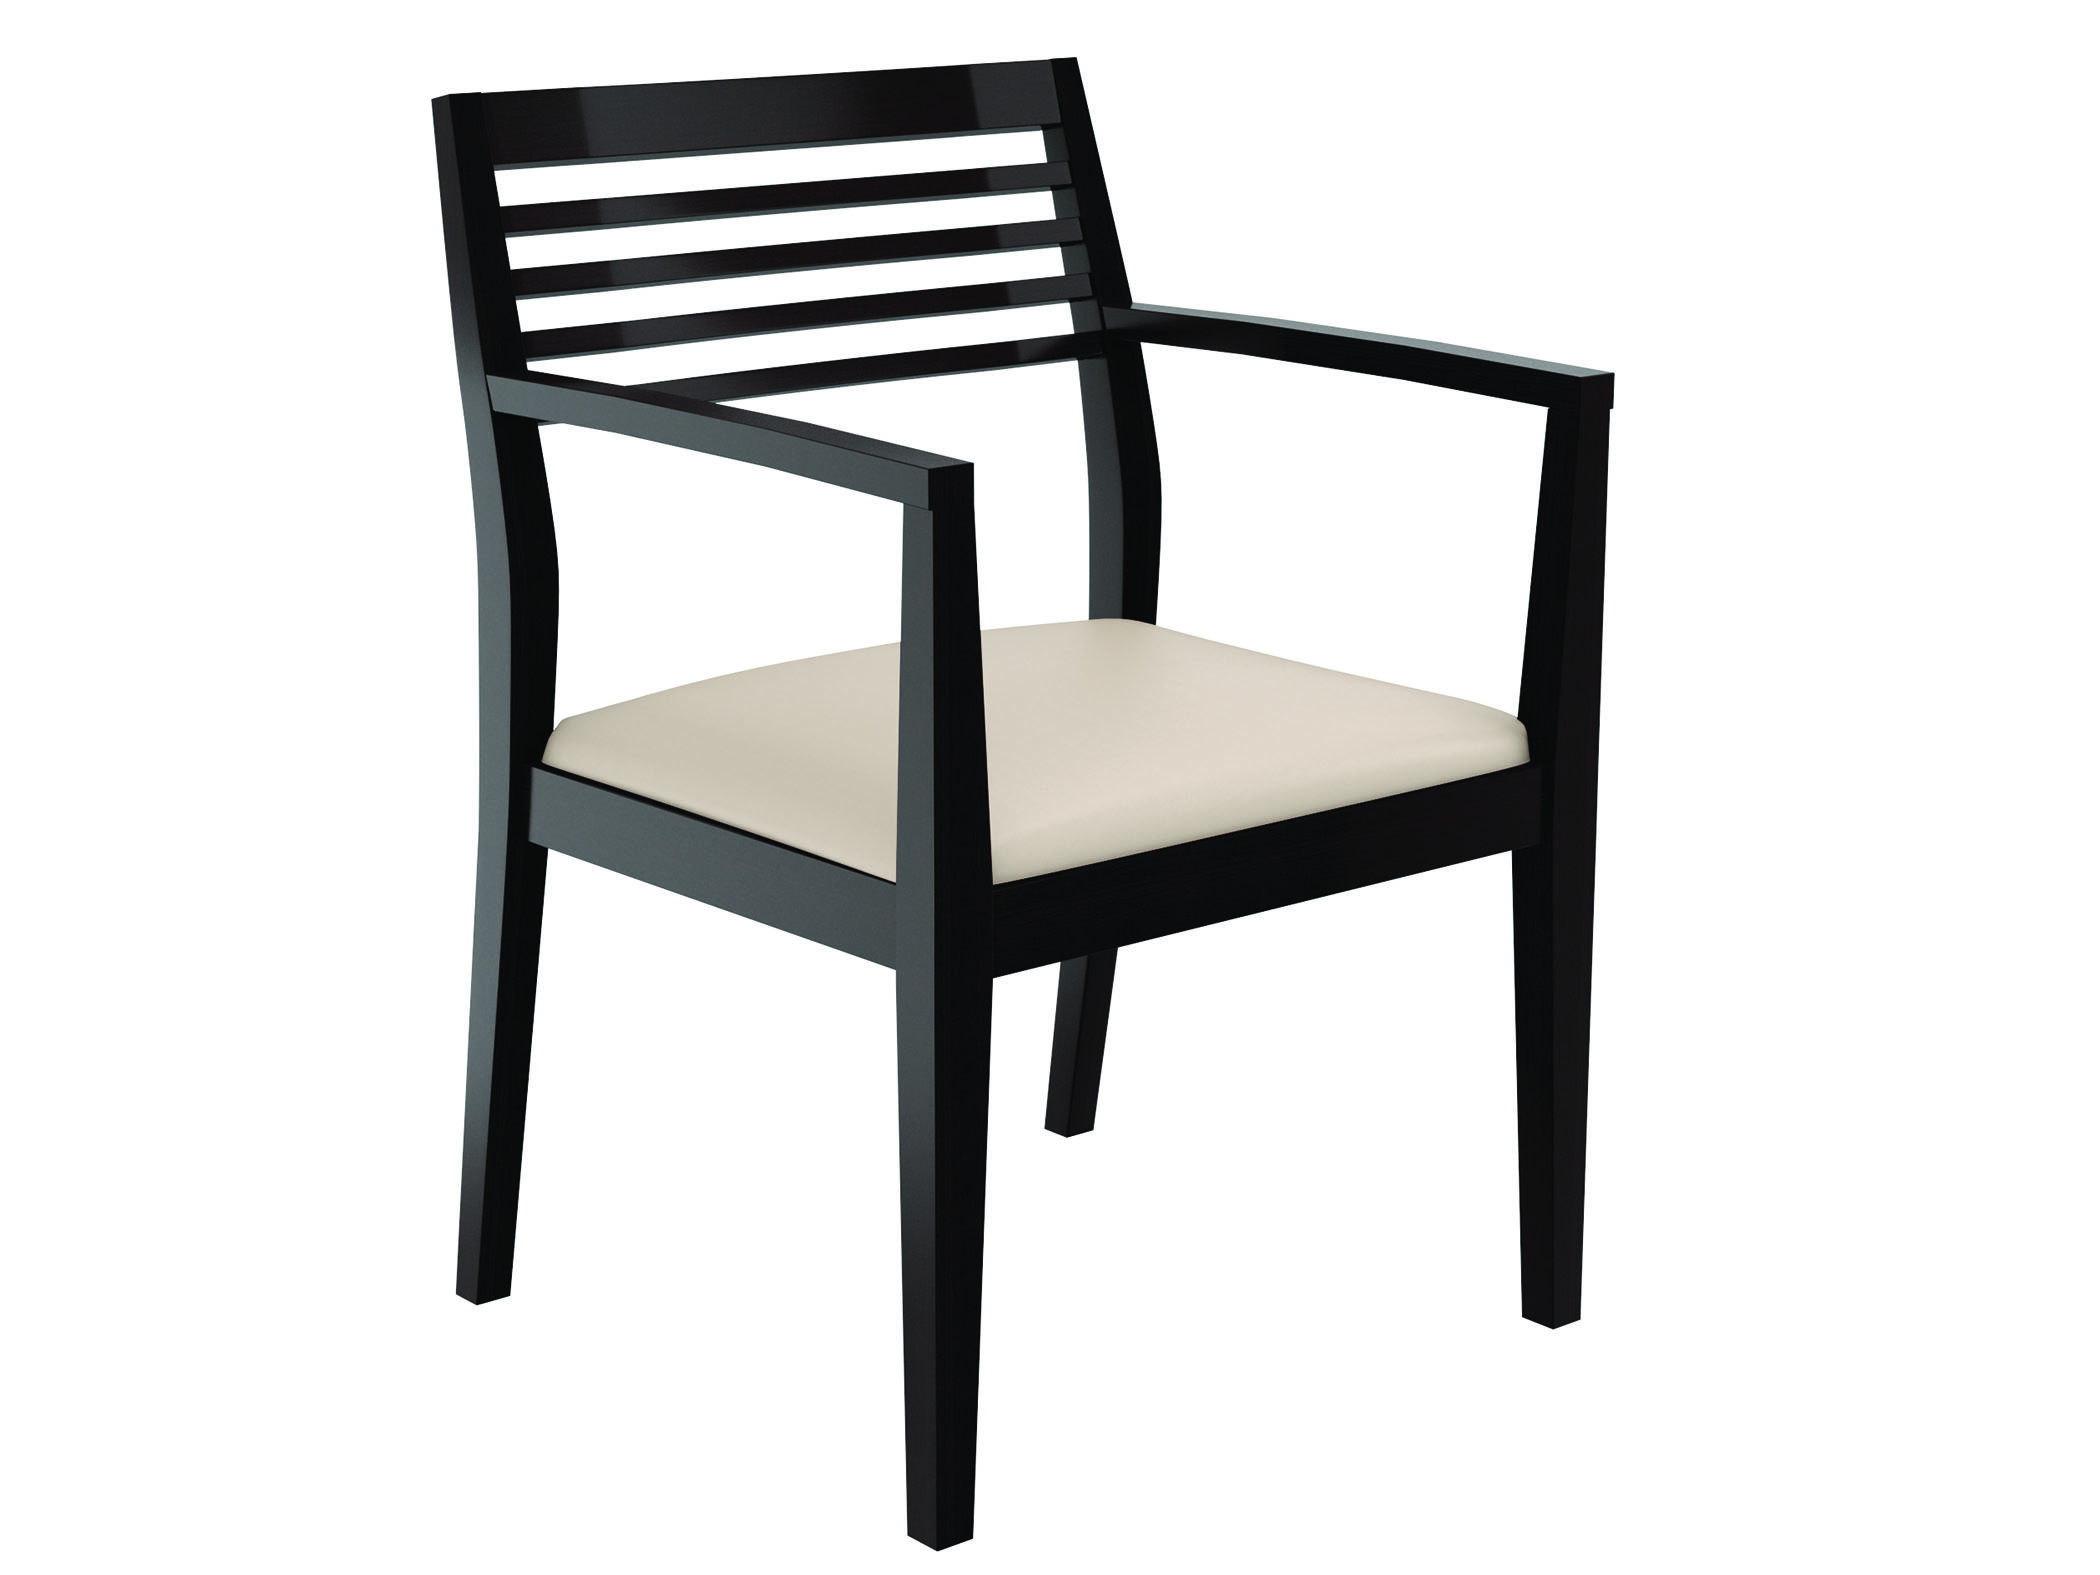 Executive Furniture from Compel - Strata guest chair